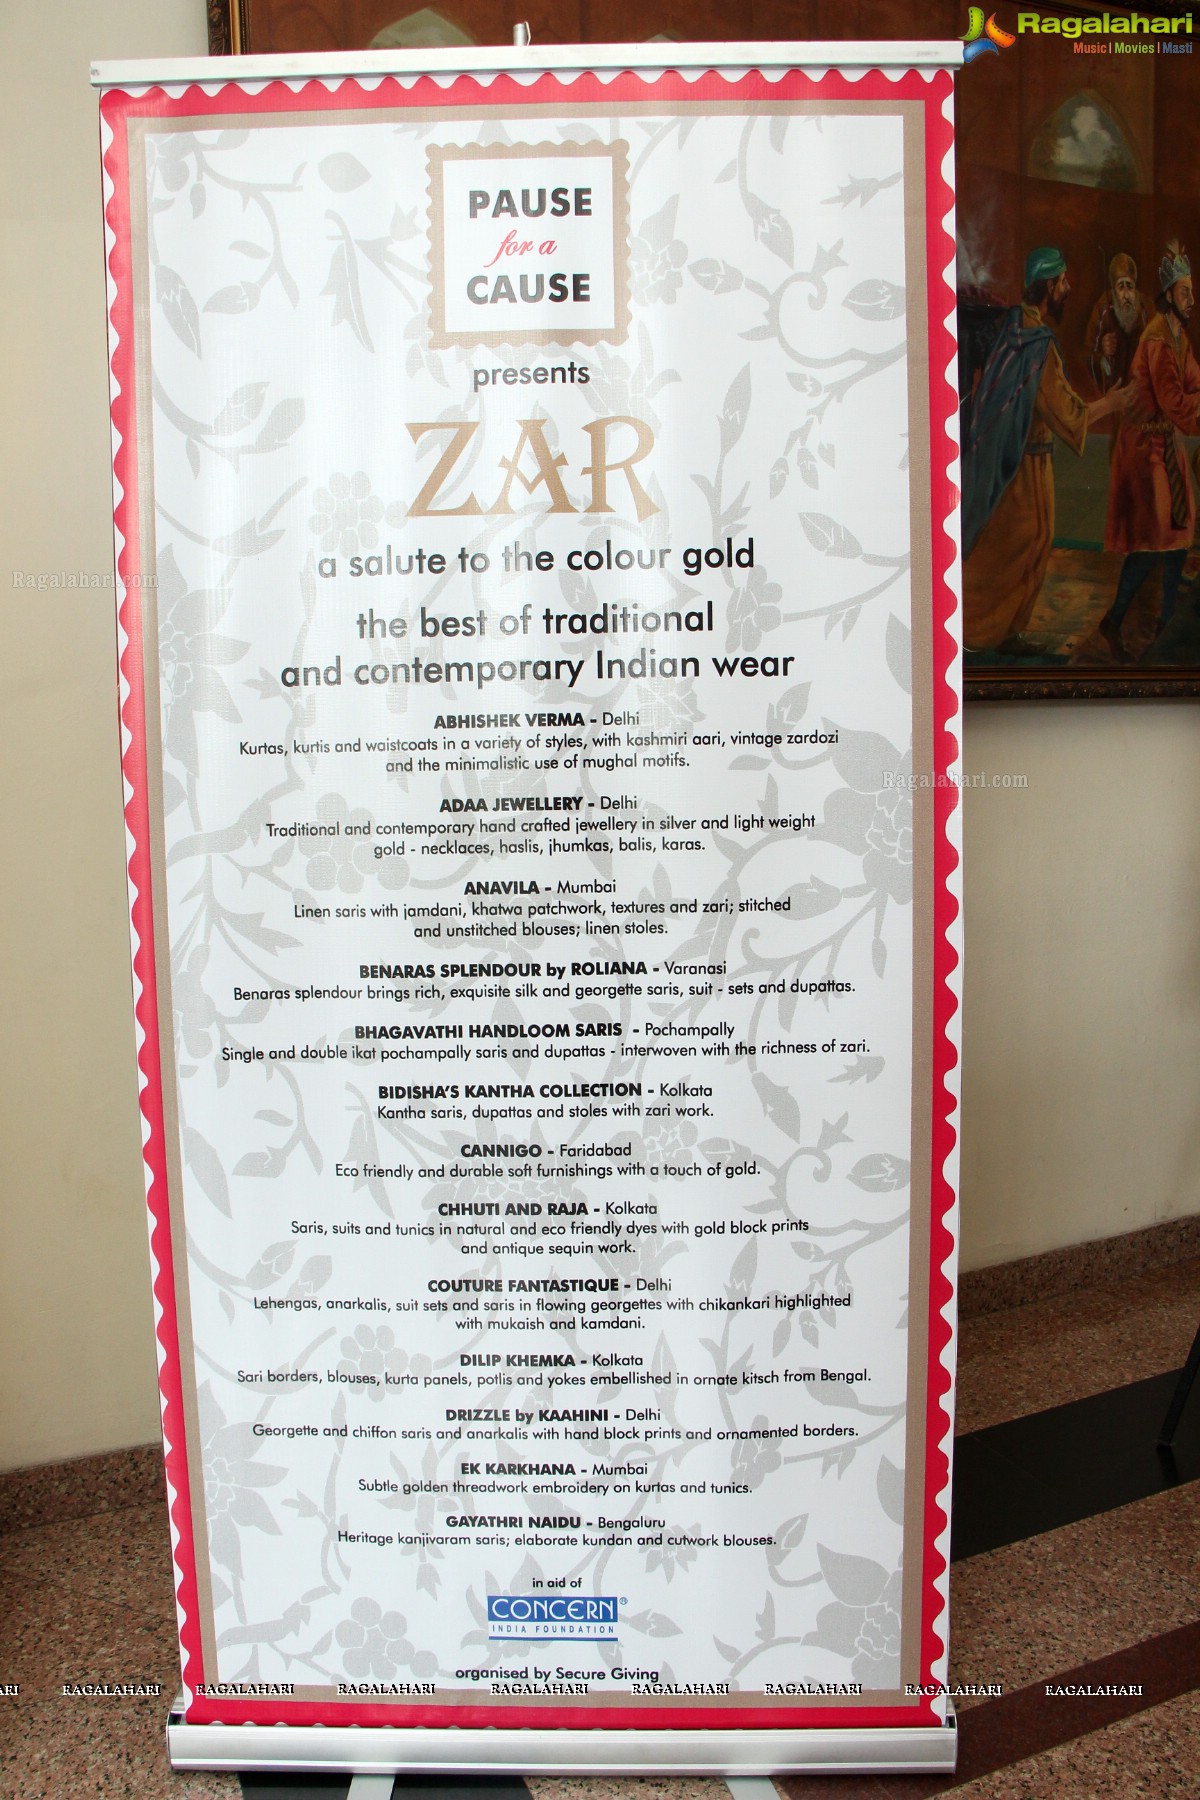 Pause for a Cause: Zar Exhibition at Taj Deccan, Hyderabad